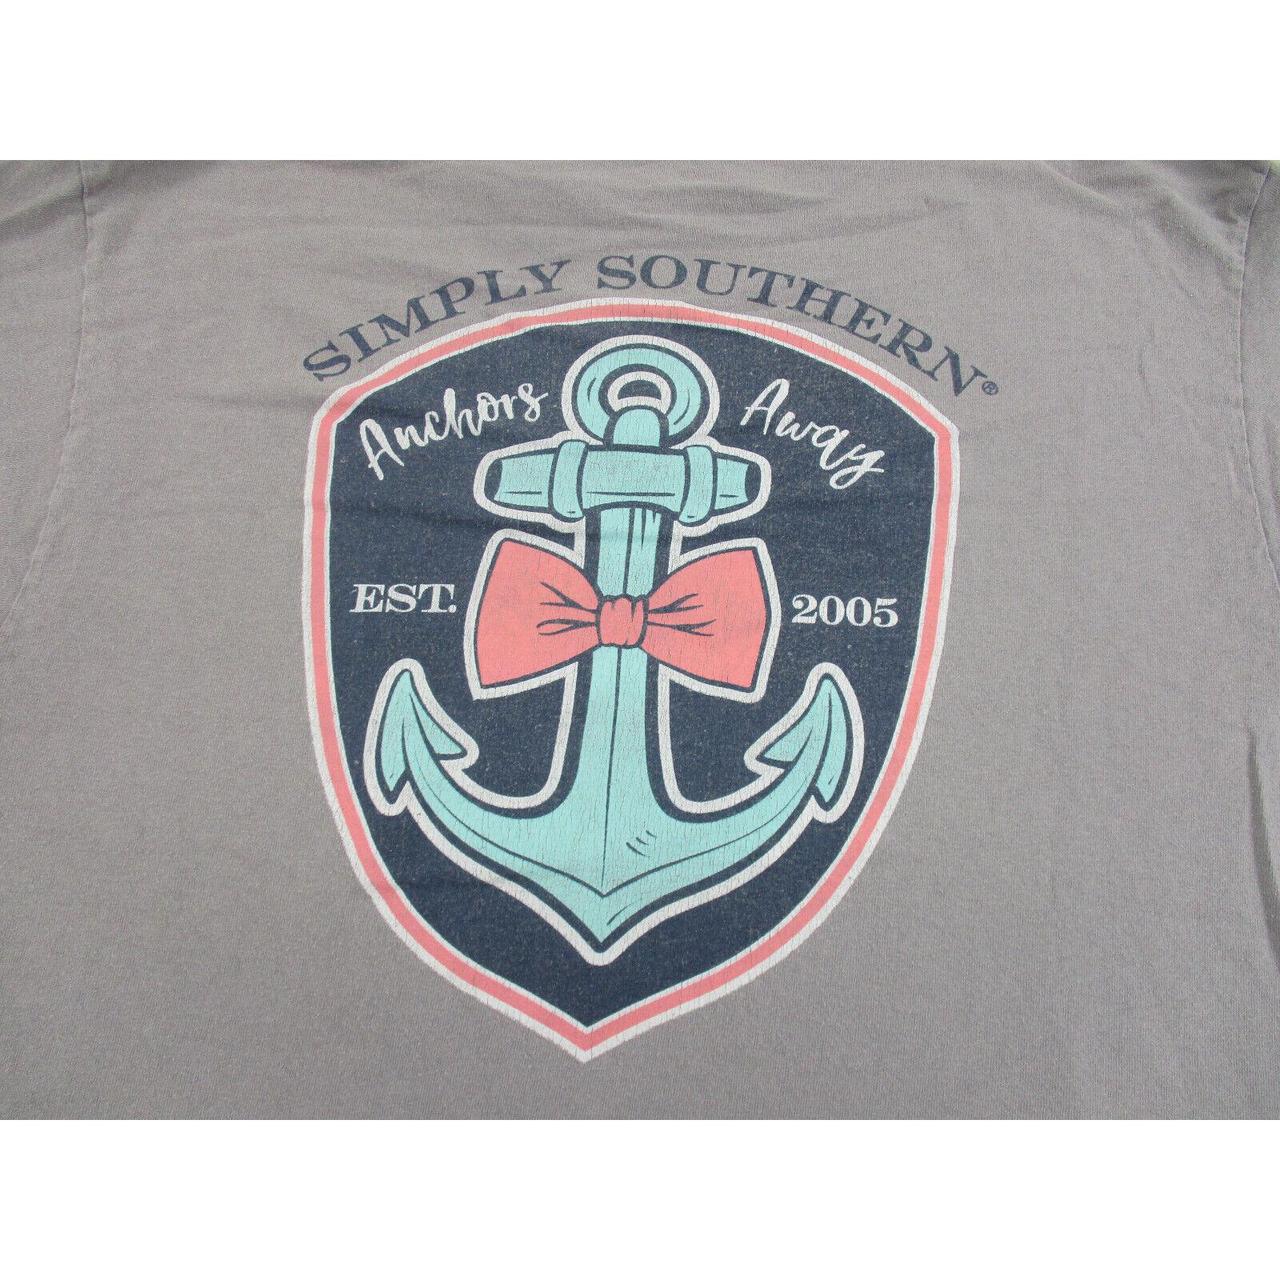 Product Image 2 - Simply Southern Shirt Womens Extra